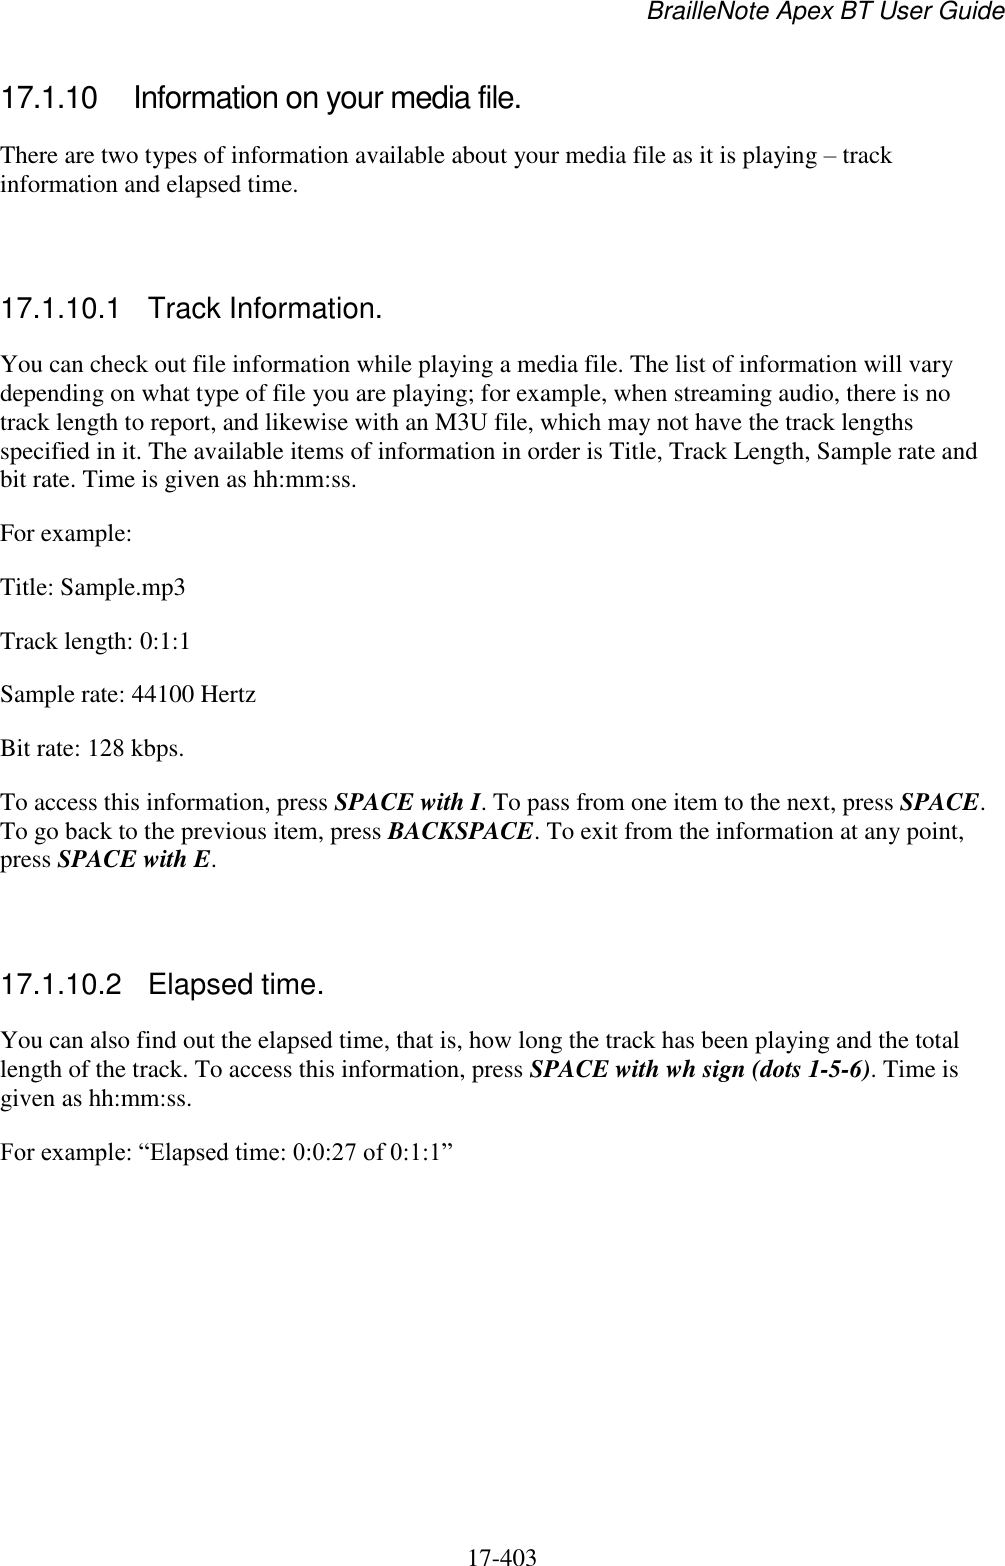 BrailleNote Apex BT User Guide   17-403   17.1.10  Information on your media file. There are two types of information available about your media file as it is playing – track information and elapsed time.   17.1.10.1  Track Information. You can check out file information while playing a media file. The list of information will vary depending on what type of file you are playing; for example, when streaming audio, there is no track length to report, and likewise with an M3U file, which may not have the track lengths specified in it. The available items of information in order is Title, Track Length, Sample rate and bit rate. Time is given as hh:mm:ss. For example: Title: Sample.mp3 Track length: 0:1:1 Sample rate: 44100 Hertz Bit rate: 128 kbps. To access this information, press SPACE with I. To pass from one item to the next, press SPACE. To go back to the previous item, press BACKSPACE. To exit from the information at any point, press SPACE with E.   17.1.10.2  Elapsed time. You can also find out the elapsed time, that is, how long the track has been playing and the total length of the track. To access this information, press SPACE with wh sign (dots 1-5-6). Time is given as hh:mm:ss. For example: “Elapsed time: 0:0:27 of 0:1:1”   